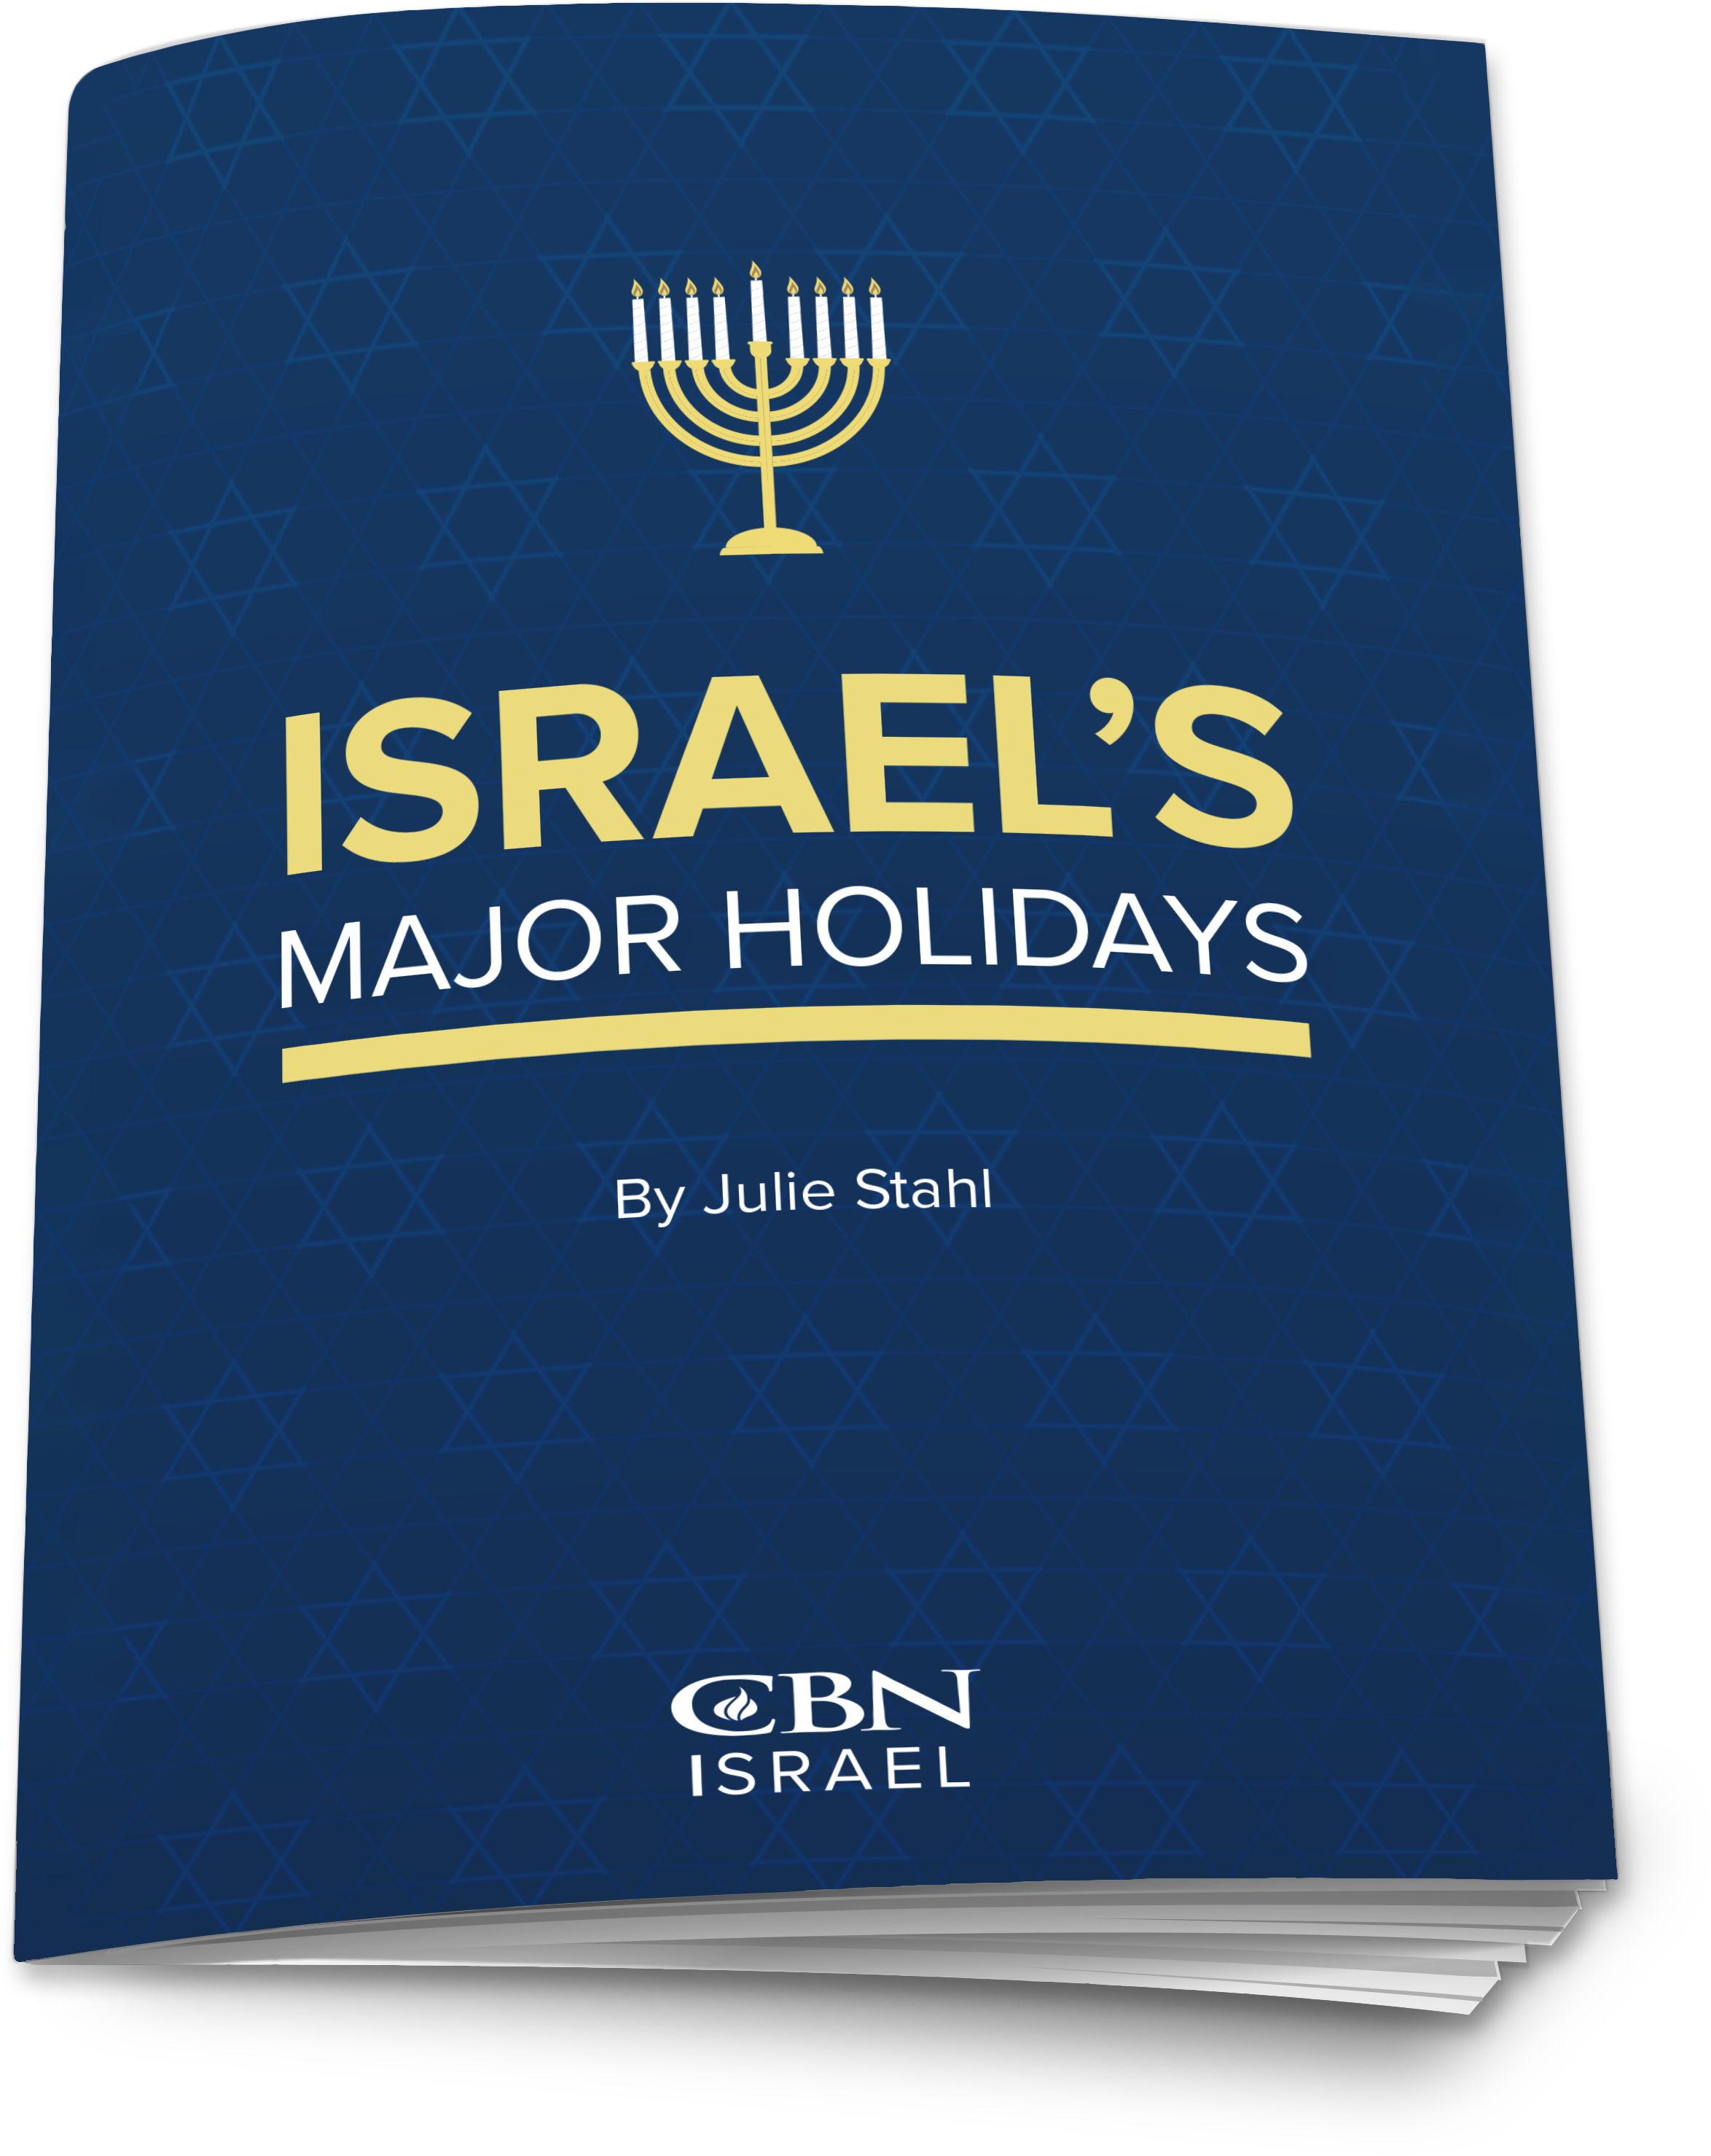 Israel's Major Holidays Guide Cover